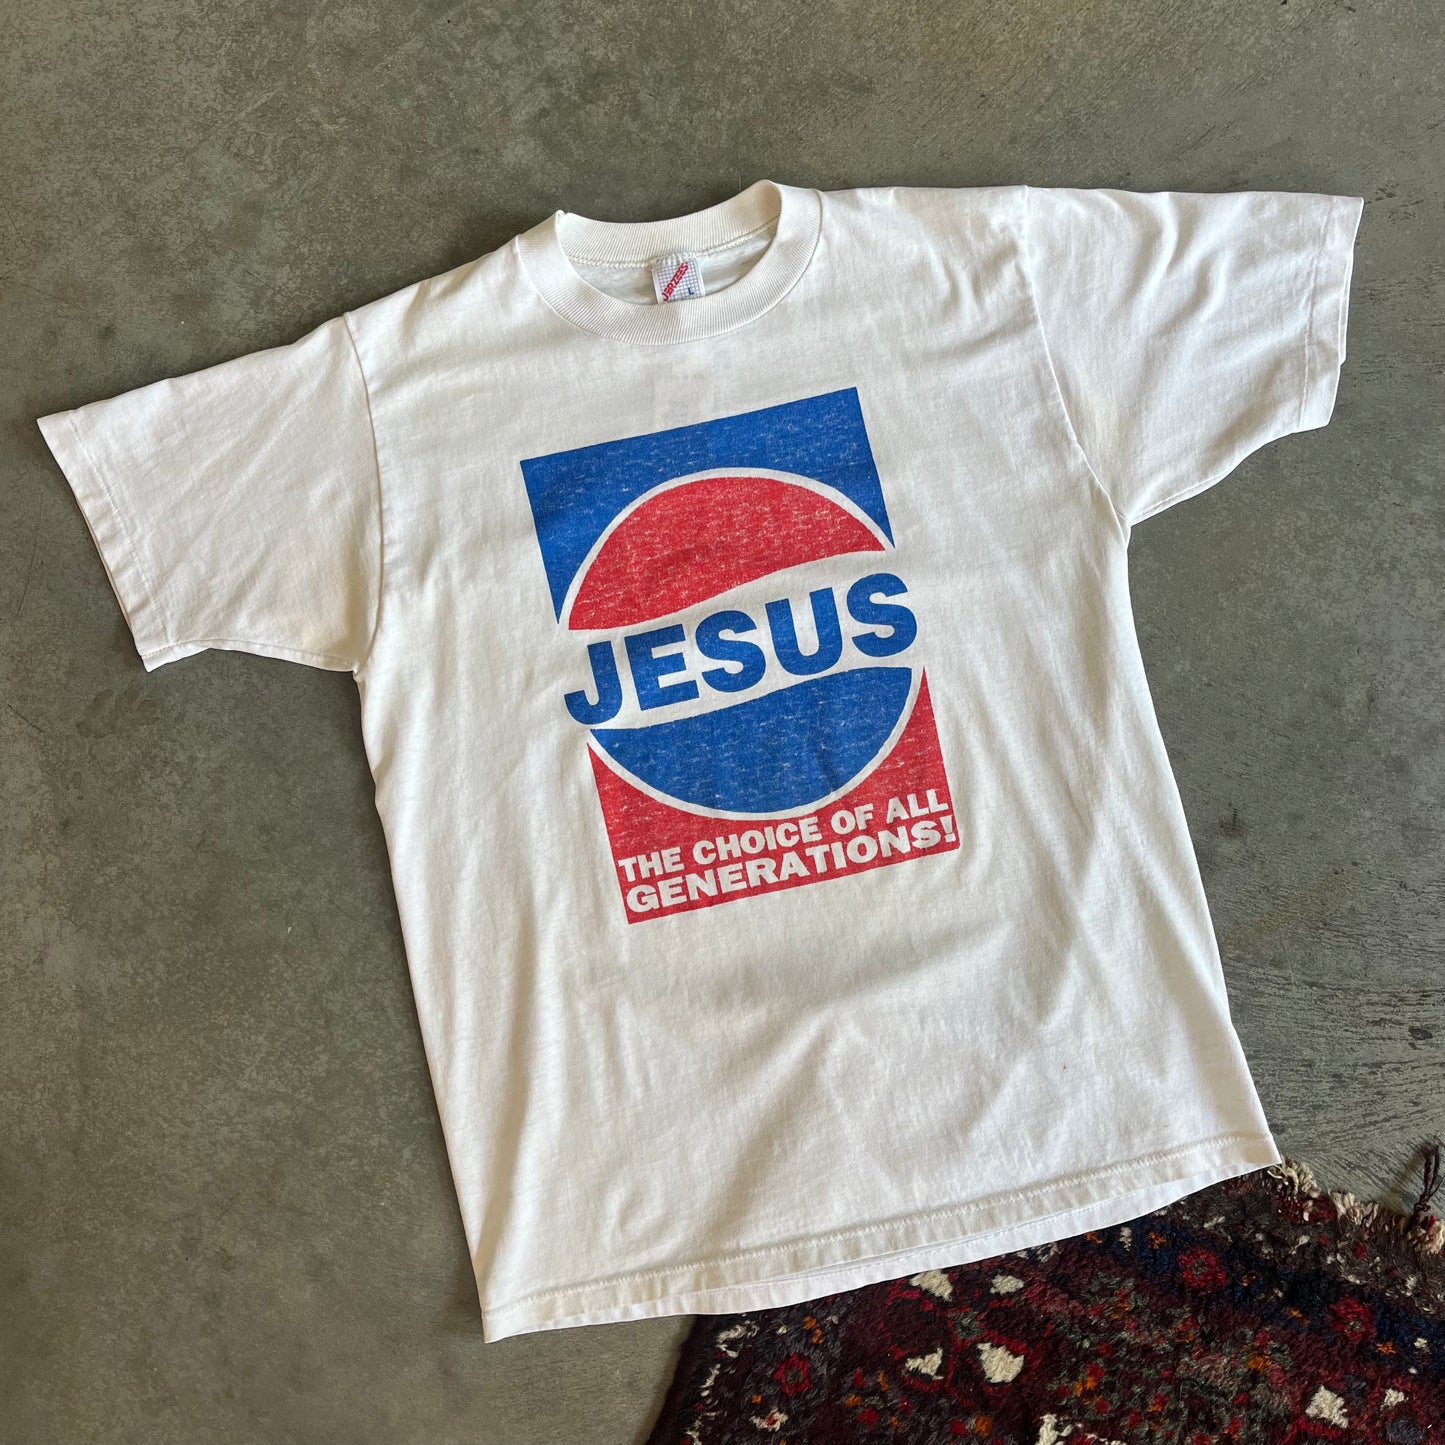 Jesus The Choice of all Generations Shirt - M (As-Is)